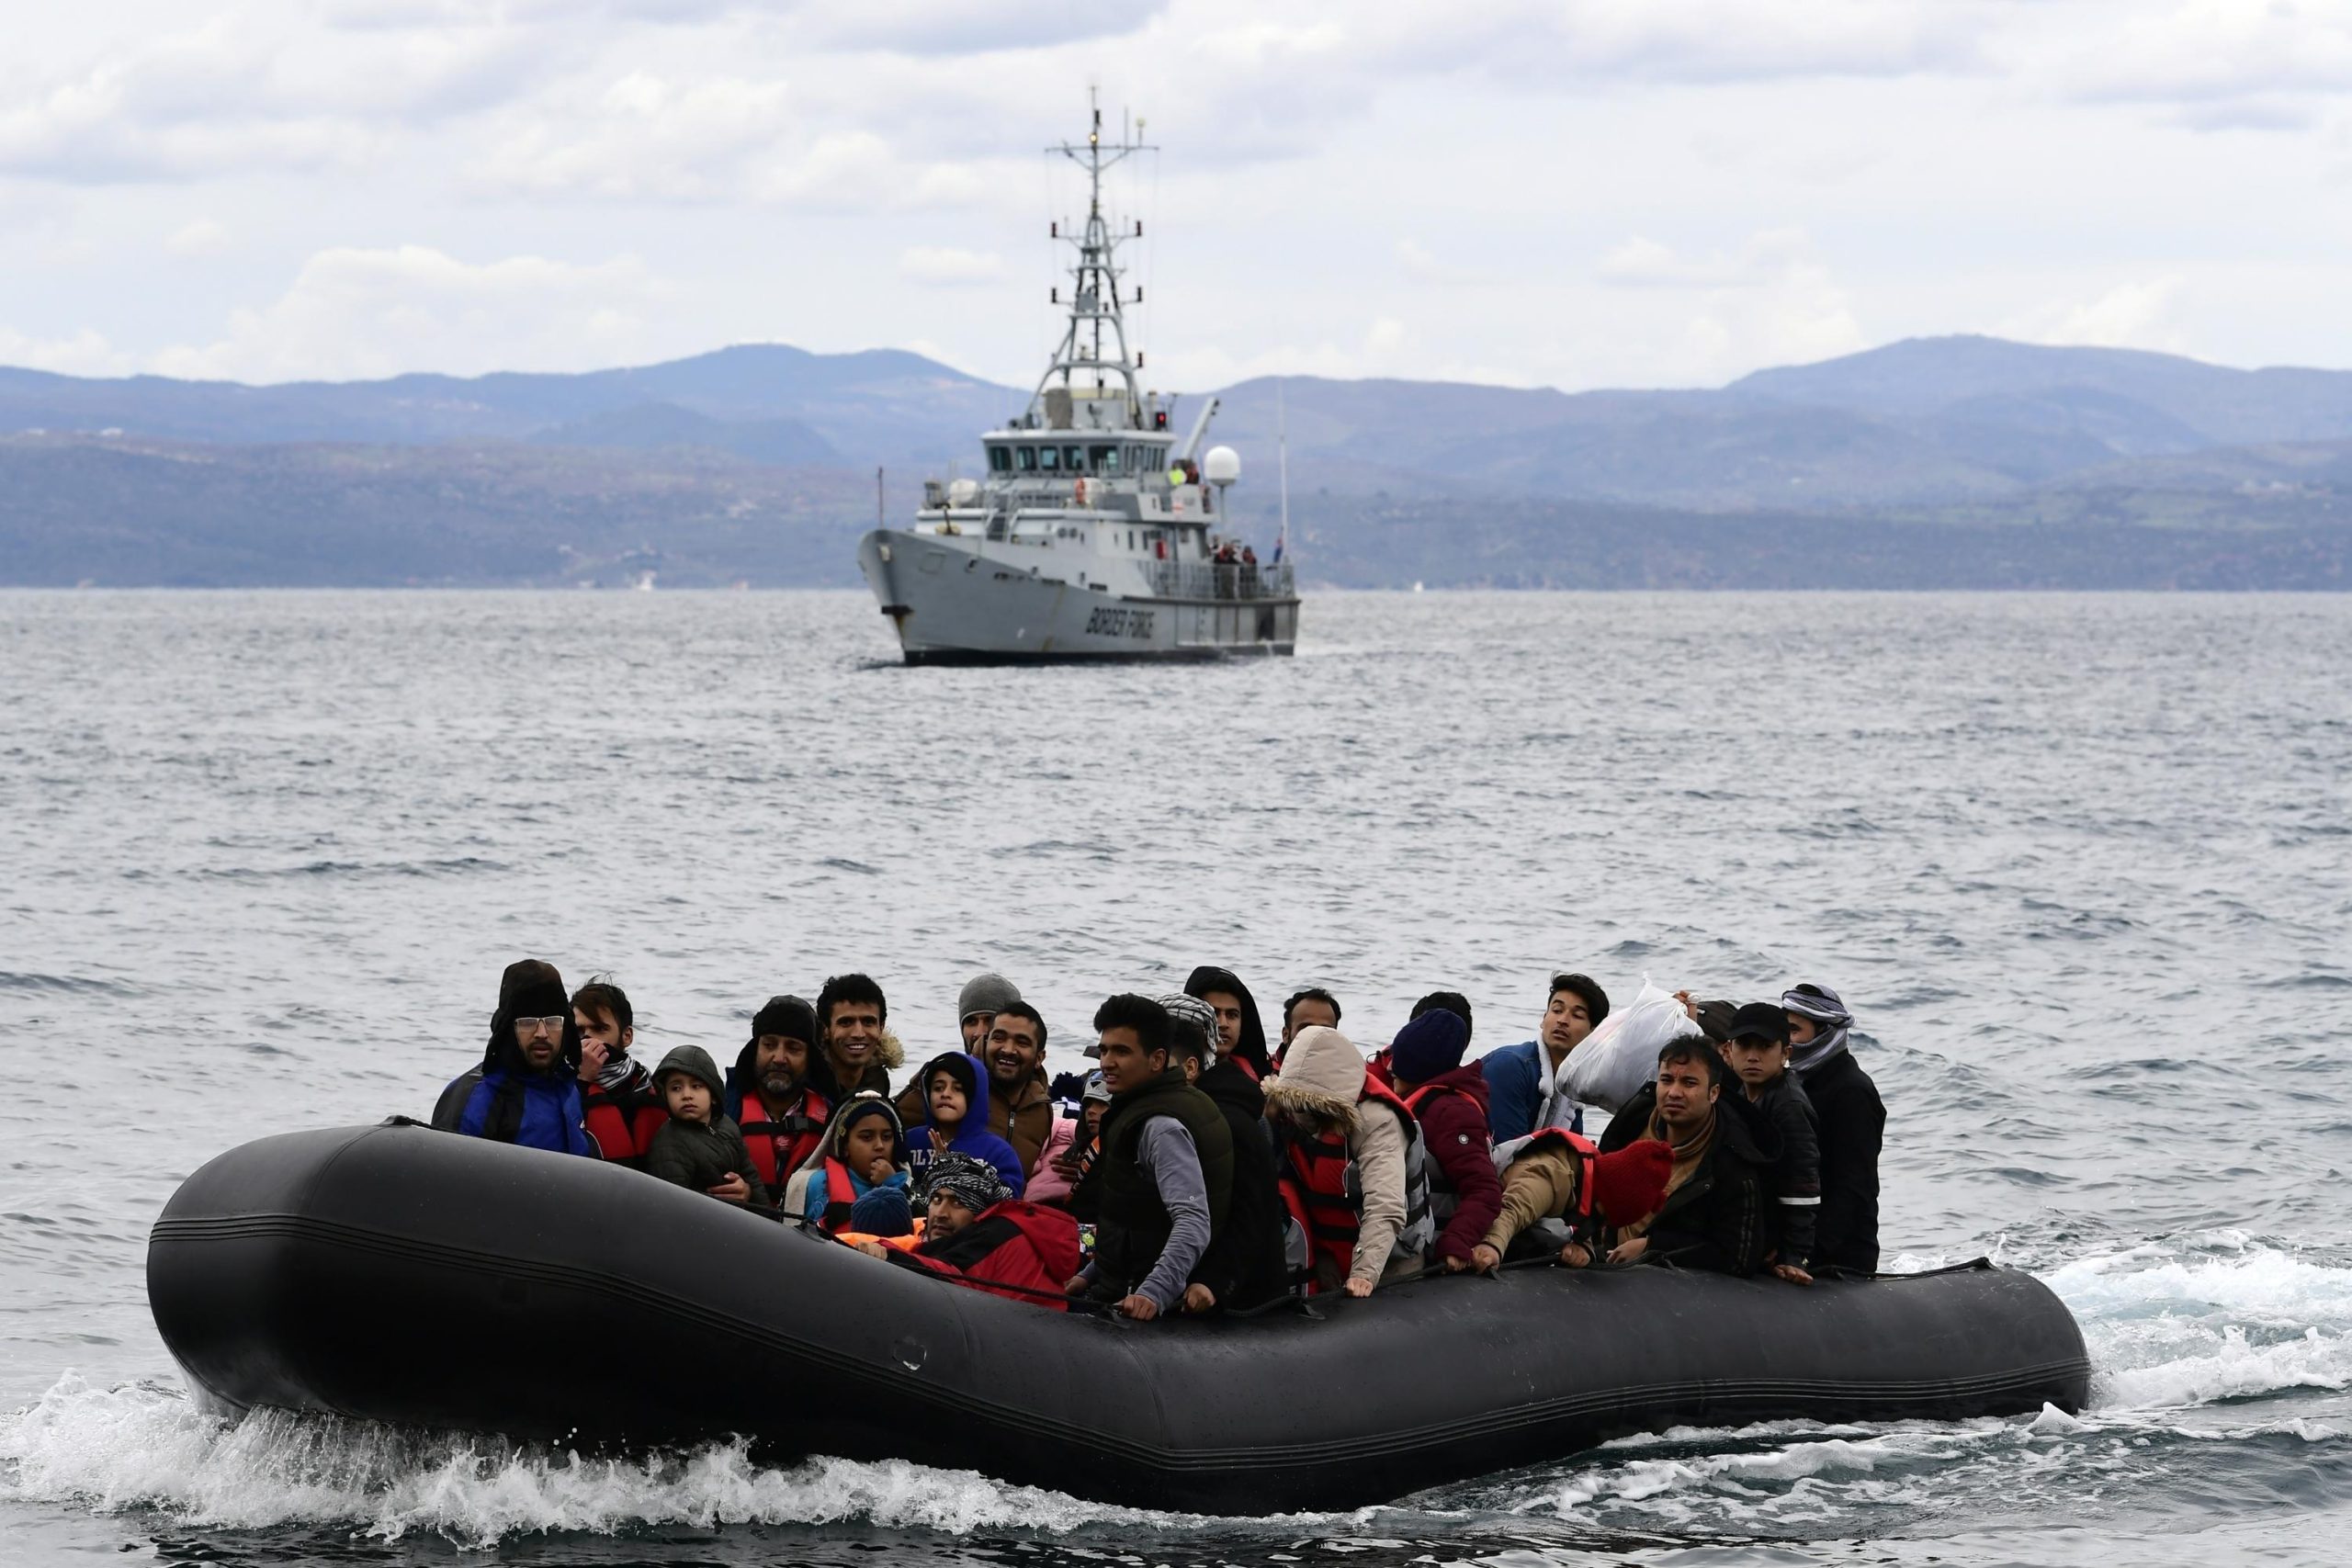 EU report: Frontex covered up migrant pushbacks from Greece 4